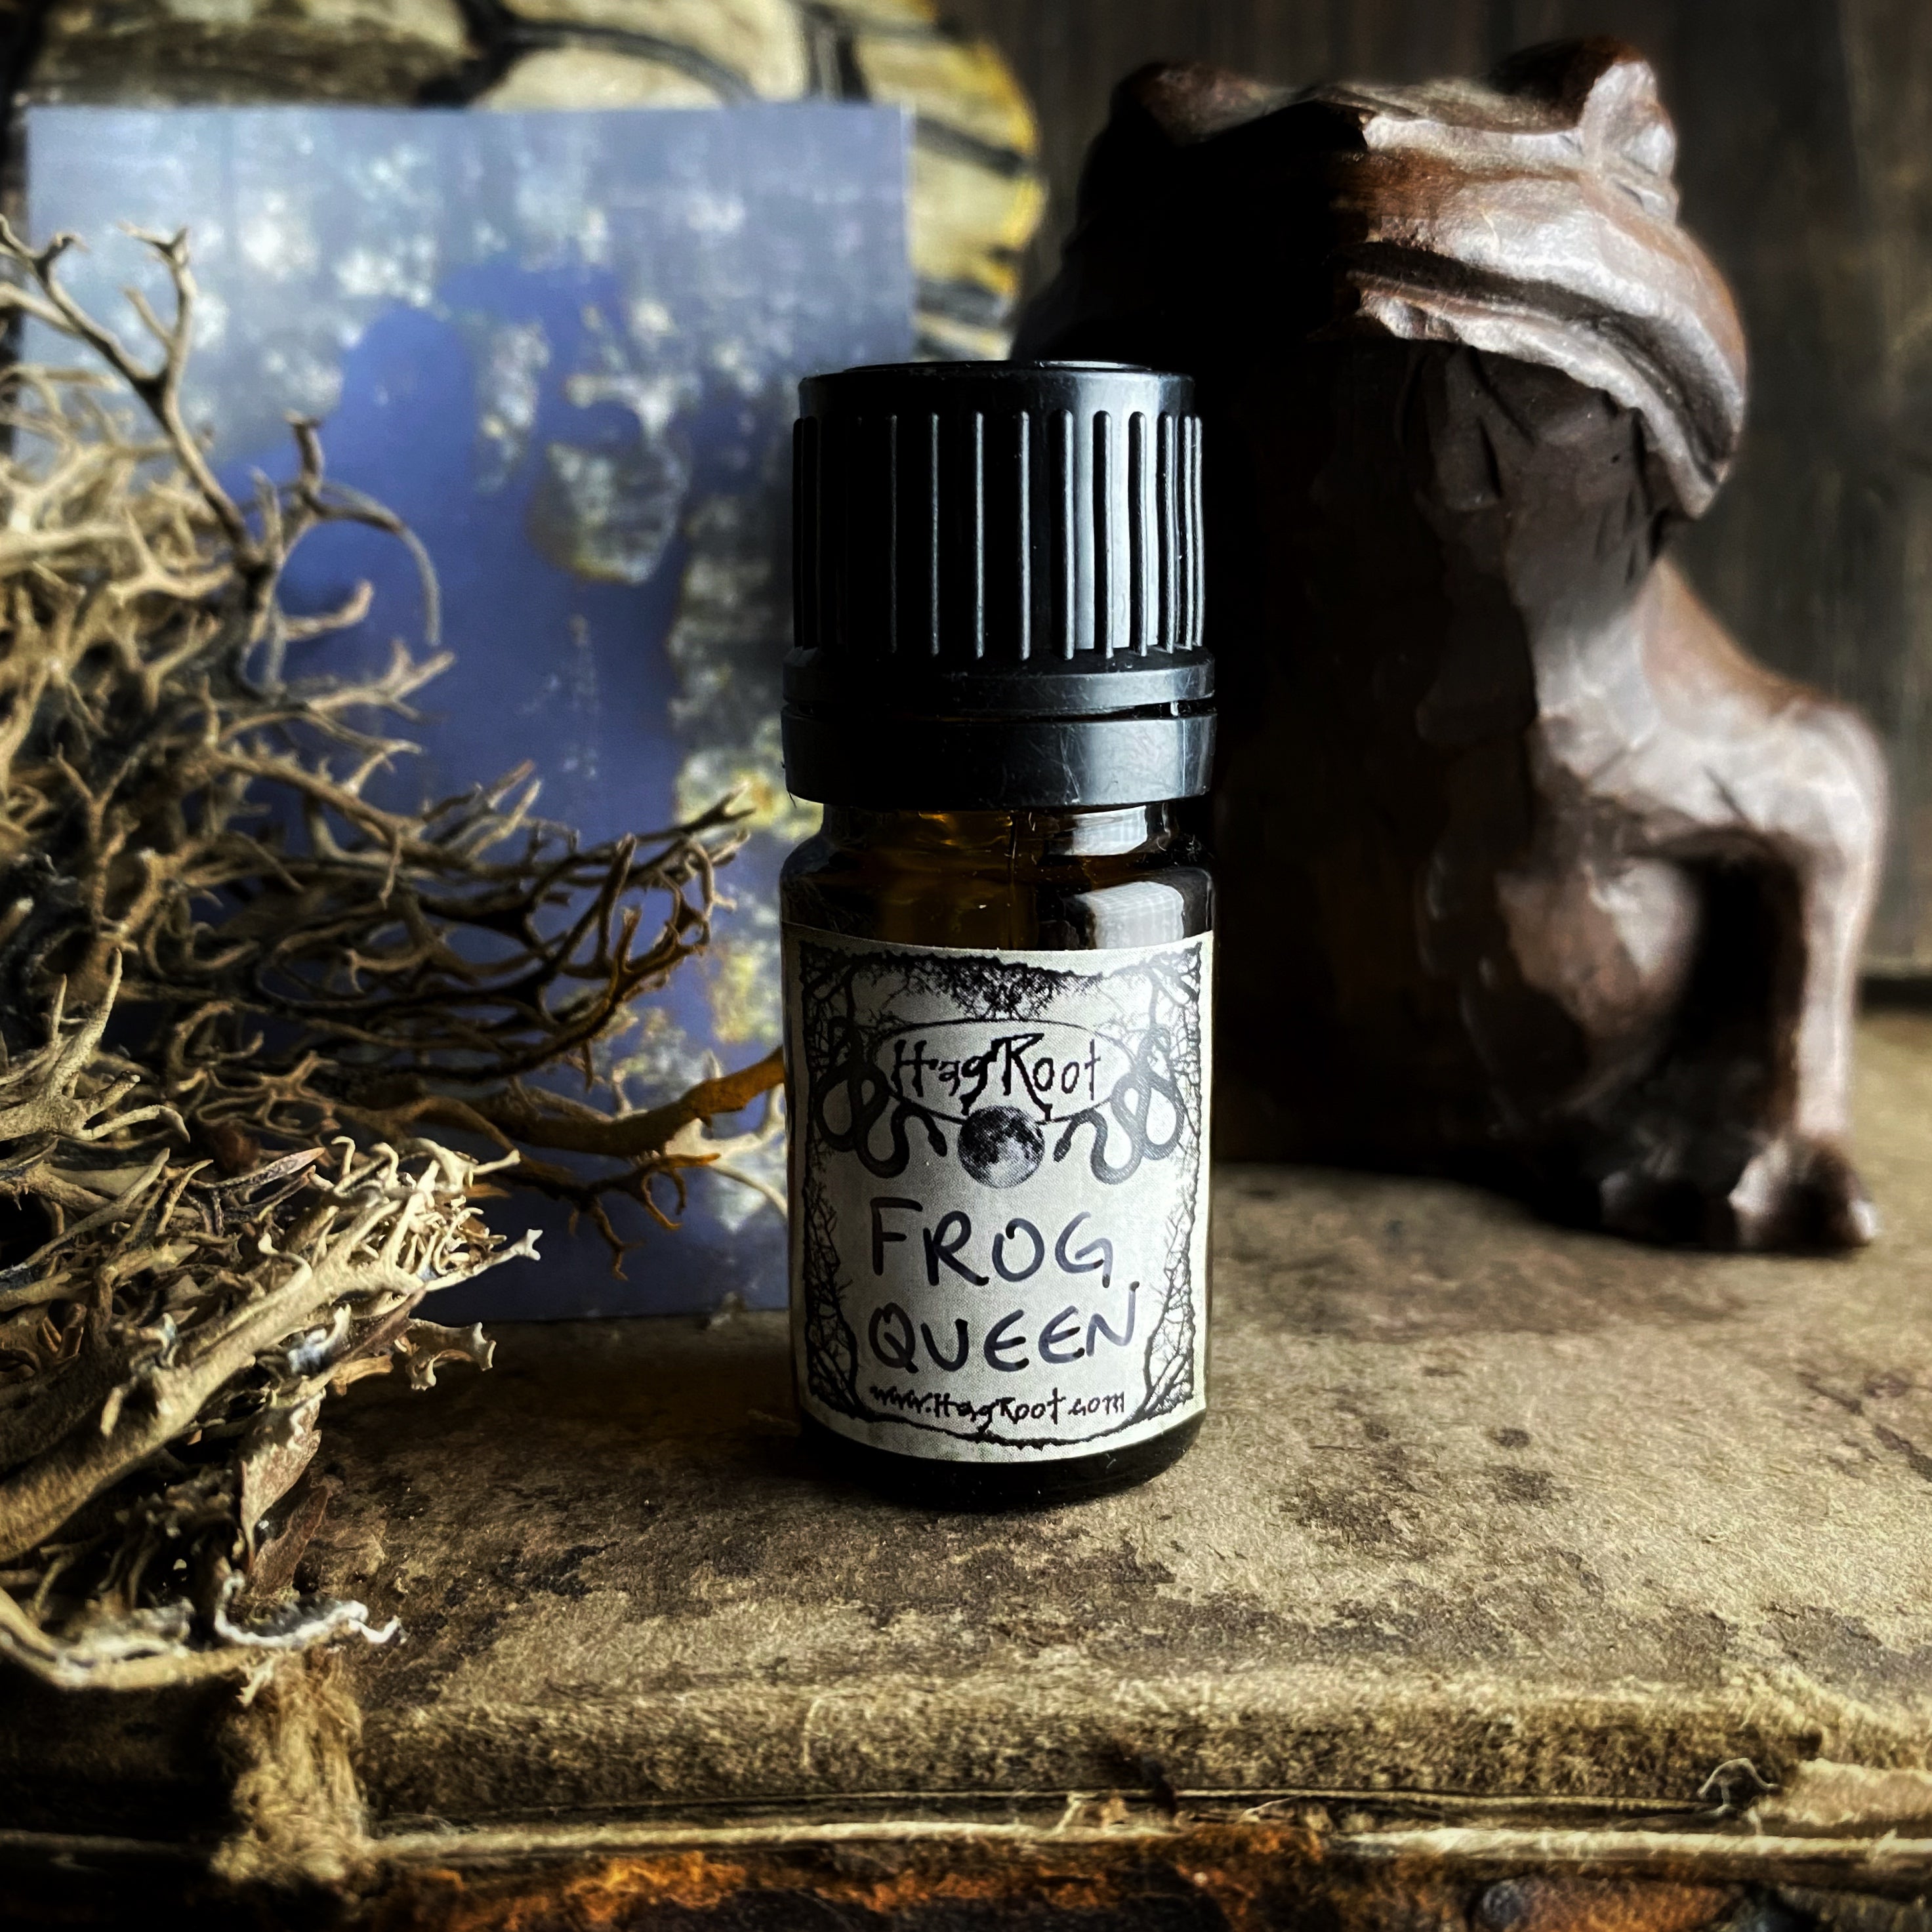 FROG QUEEN-(Water Lily, Vanilla, Cedar, Sandalwood, Champaka Flowers, Vetiver, Labdanum, Cypress)-Perfume, Cologne, Anointing, Ritual Oil